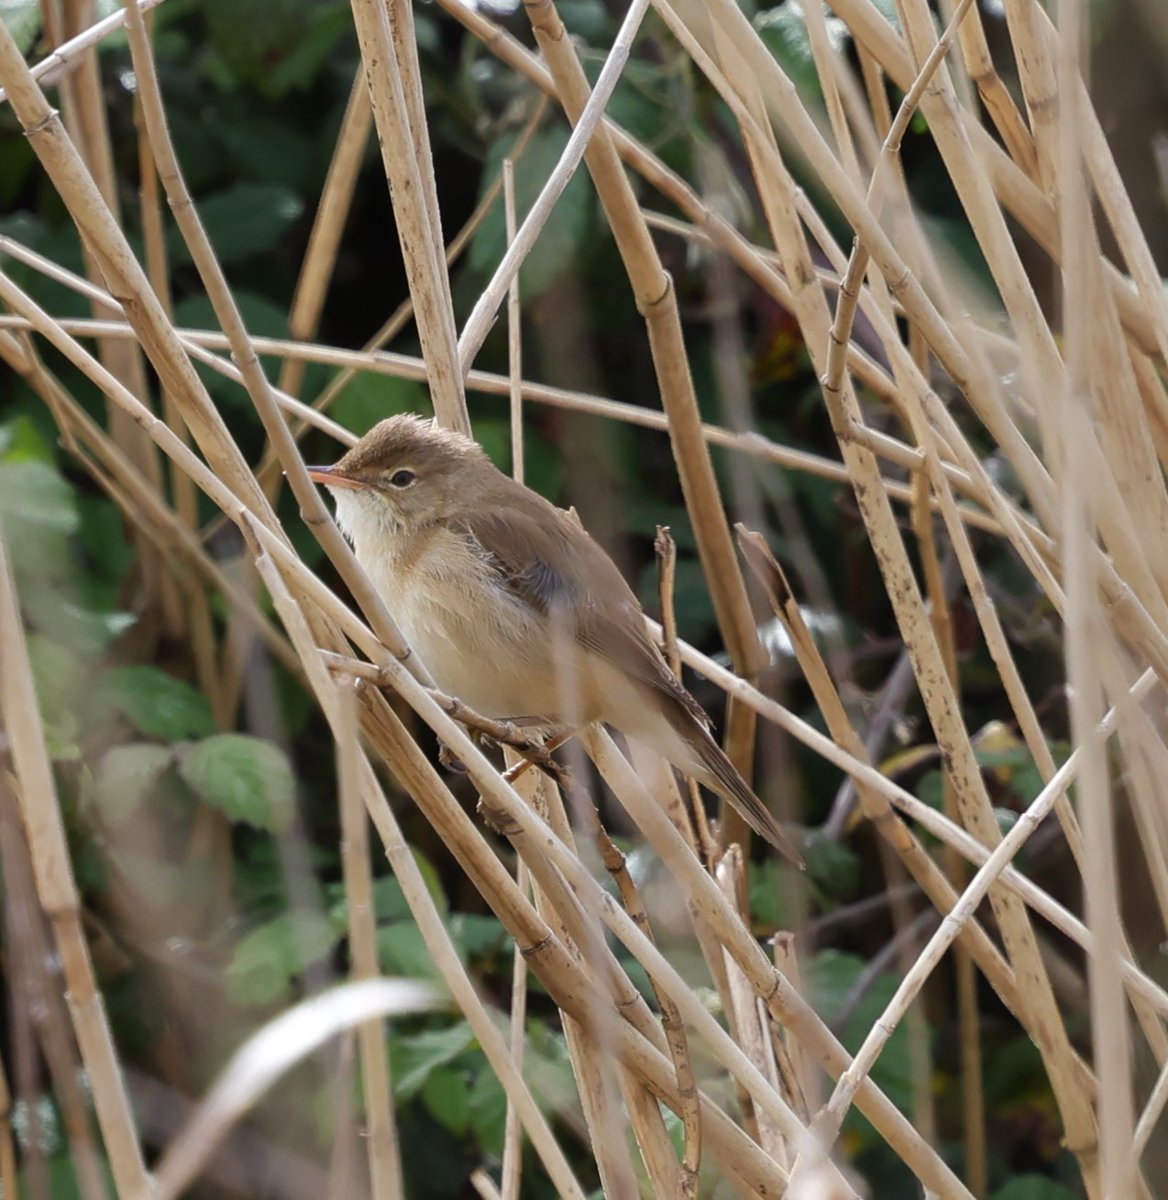 I saw a few firsts for 2024 at Rainham on Sunday - my first Wheatear, Lesser Whitethroat, Common Whitethroat and Reed Warbler. Came home on a high! @RSPBRainham @KentWildlife